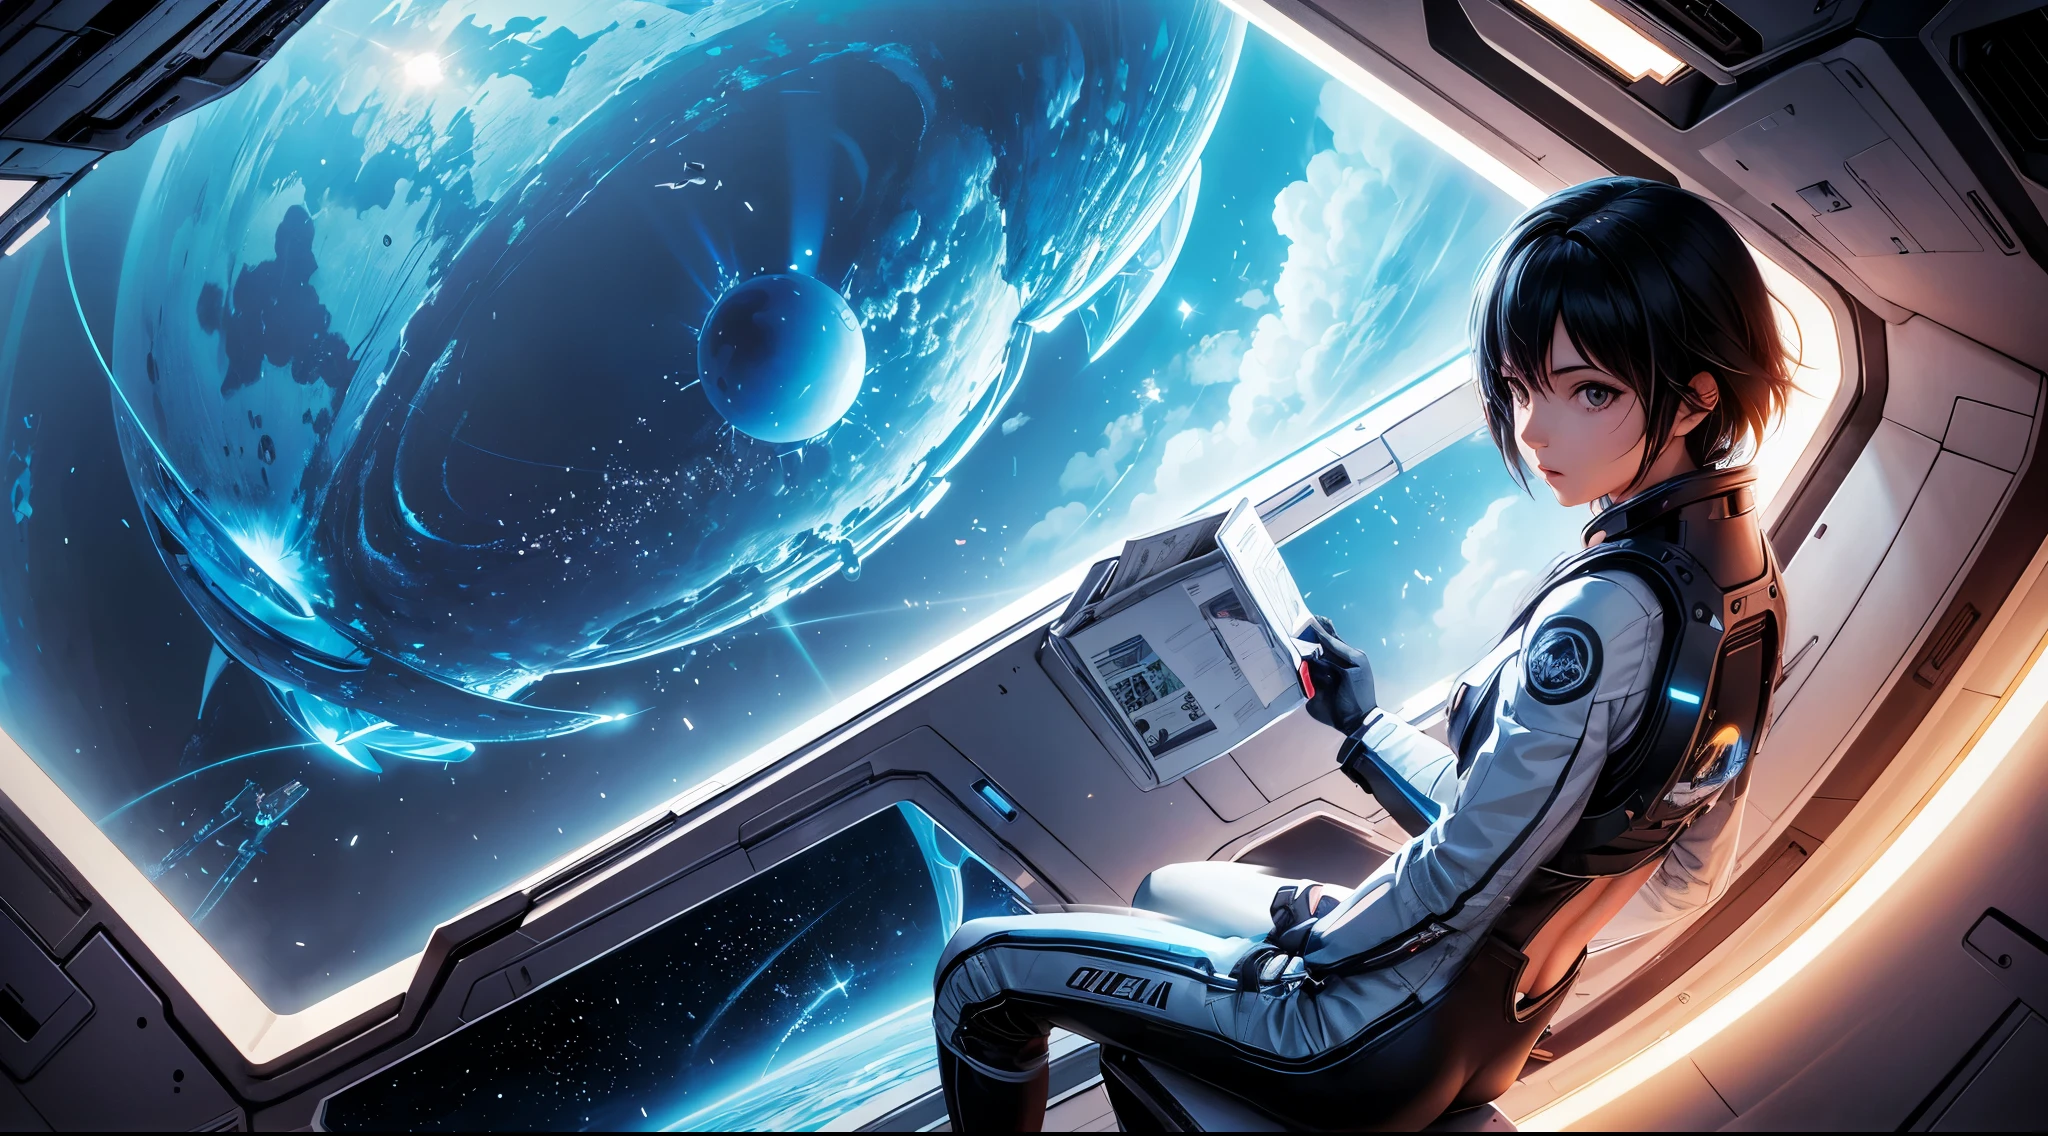 anime style, who sits on the ground and looks at the planet, space cowgirl, Cyber-space cowgirl, inspired by Josan Gonzalez, Makoto Shinkai ( Apex Legends ), akira&#39;s art style, Ross Tran Style, Vibraciones de akira, akira&#39;s art style, floating next to the planets, Josan Gonzalez, scifi art!!!!!!!, Josan Gonzalez!!!, in the space, modern sci-fi anime